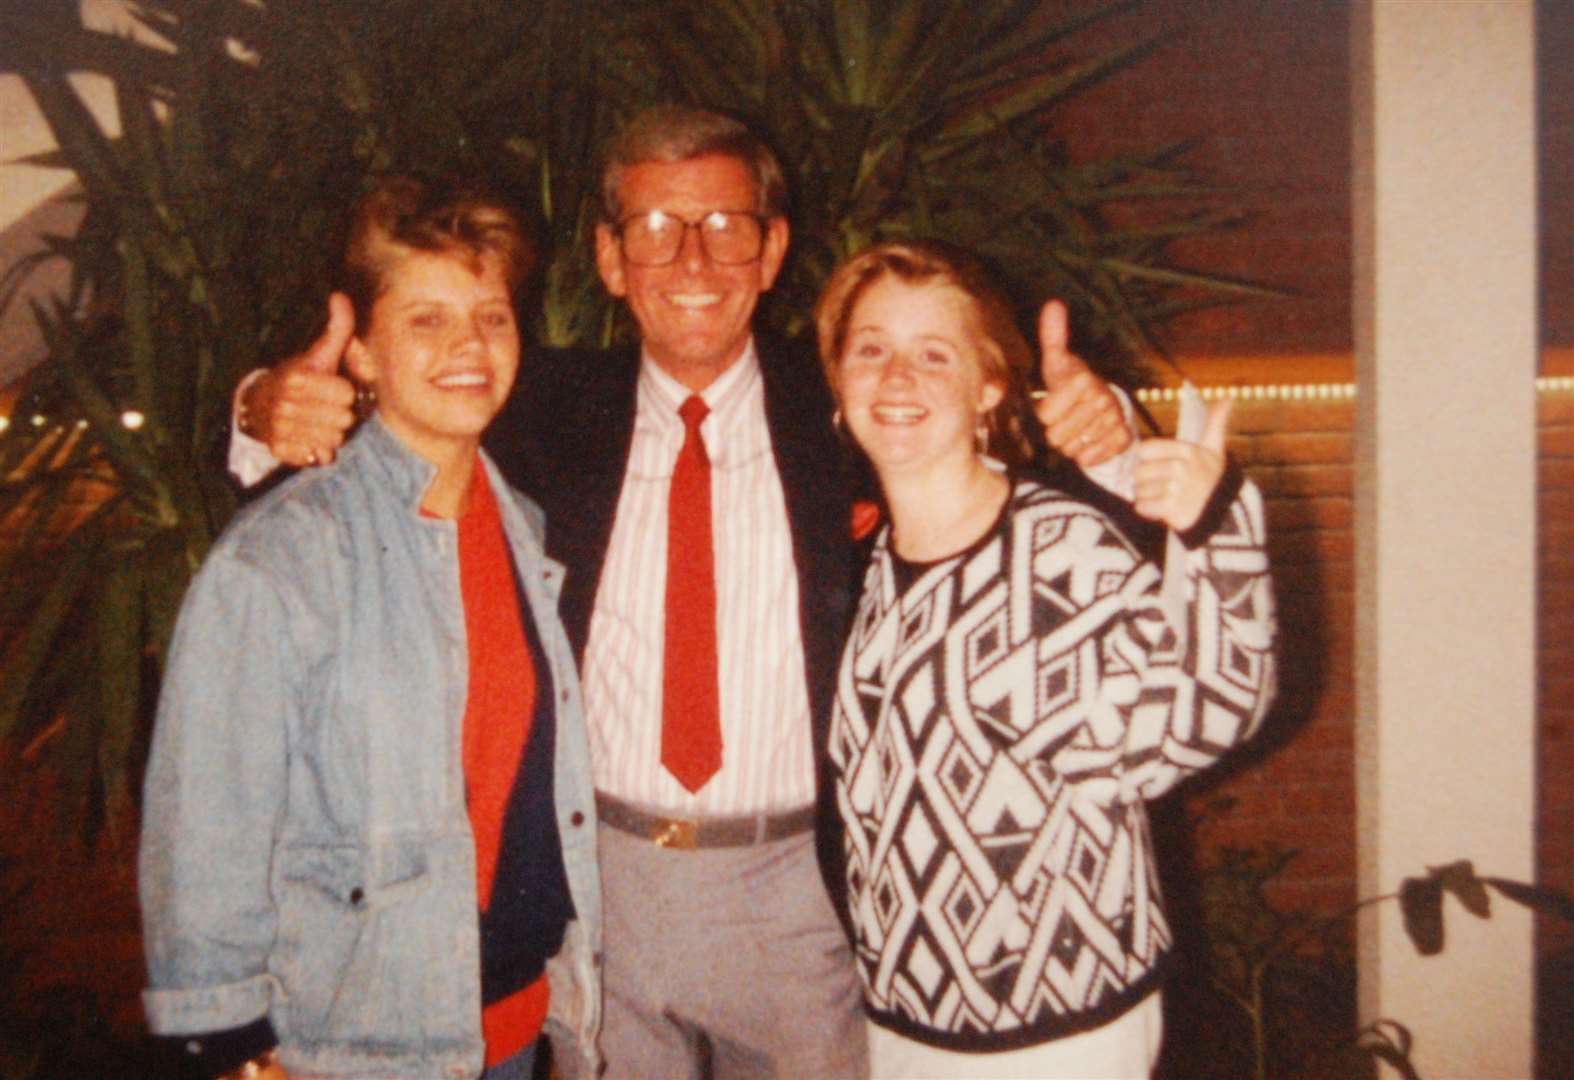 Former contestant Jo Treharne (left) and friend Julie with Bob Holness in 1985